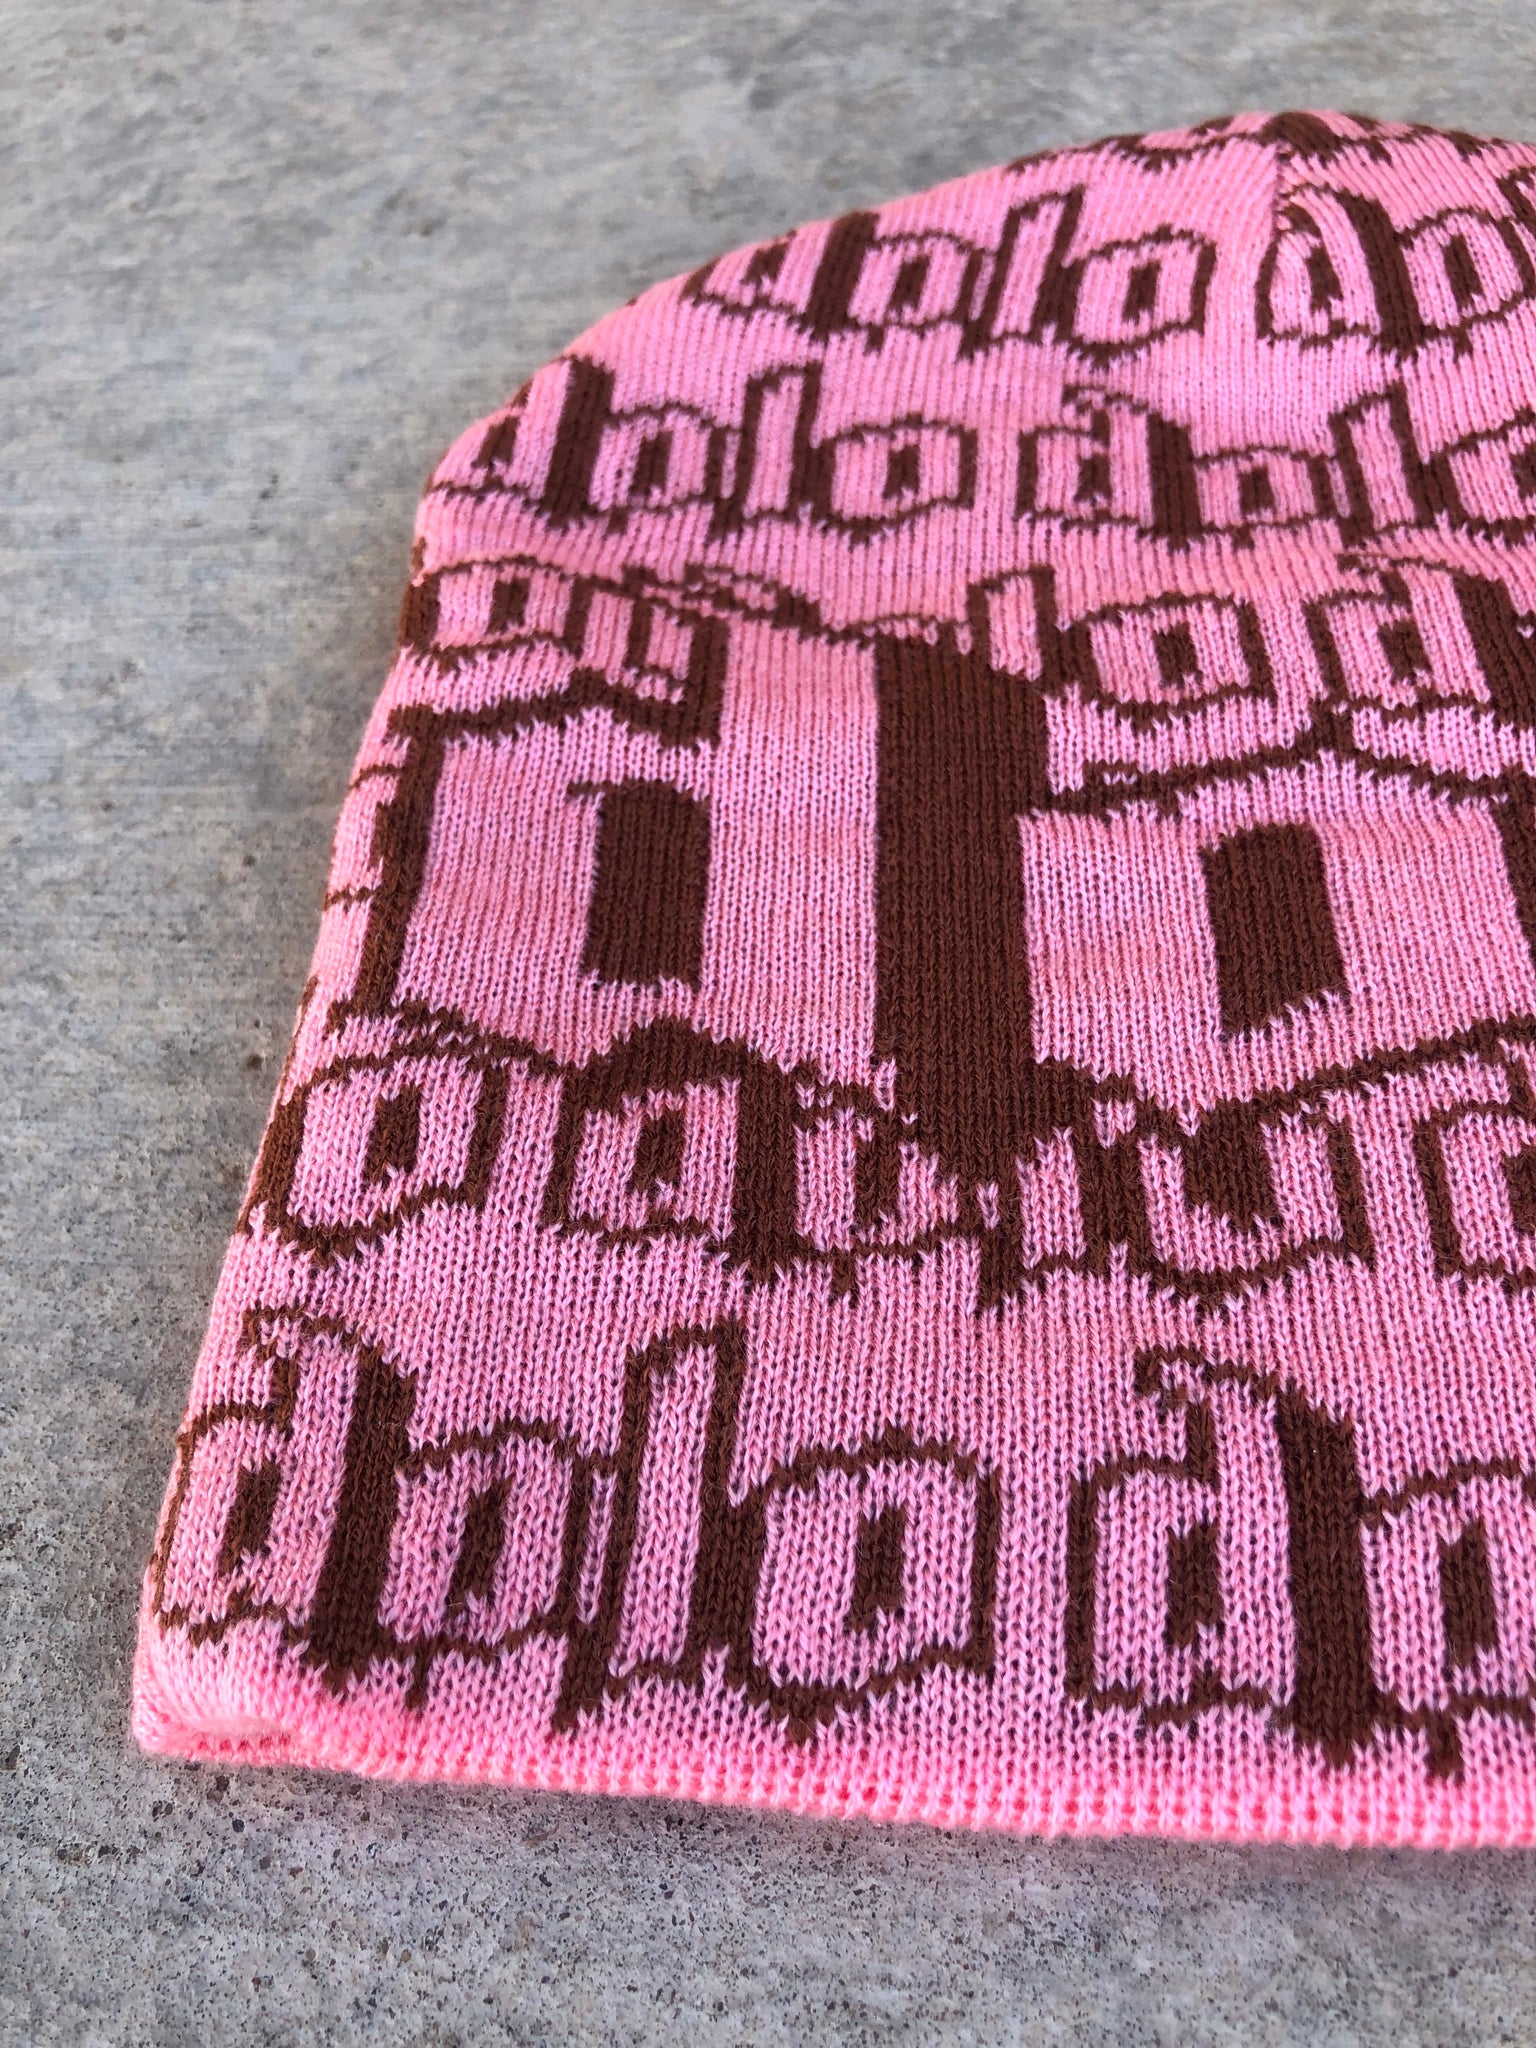 Pink Knitted Beanie